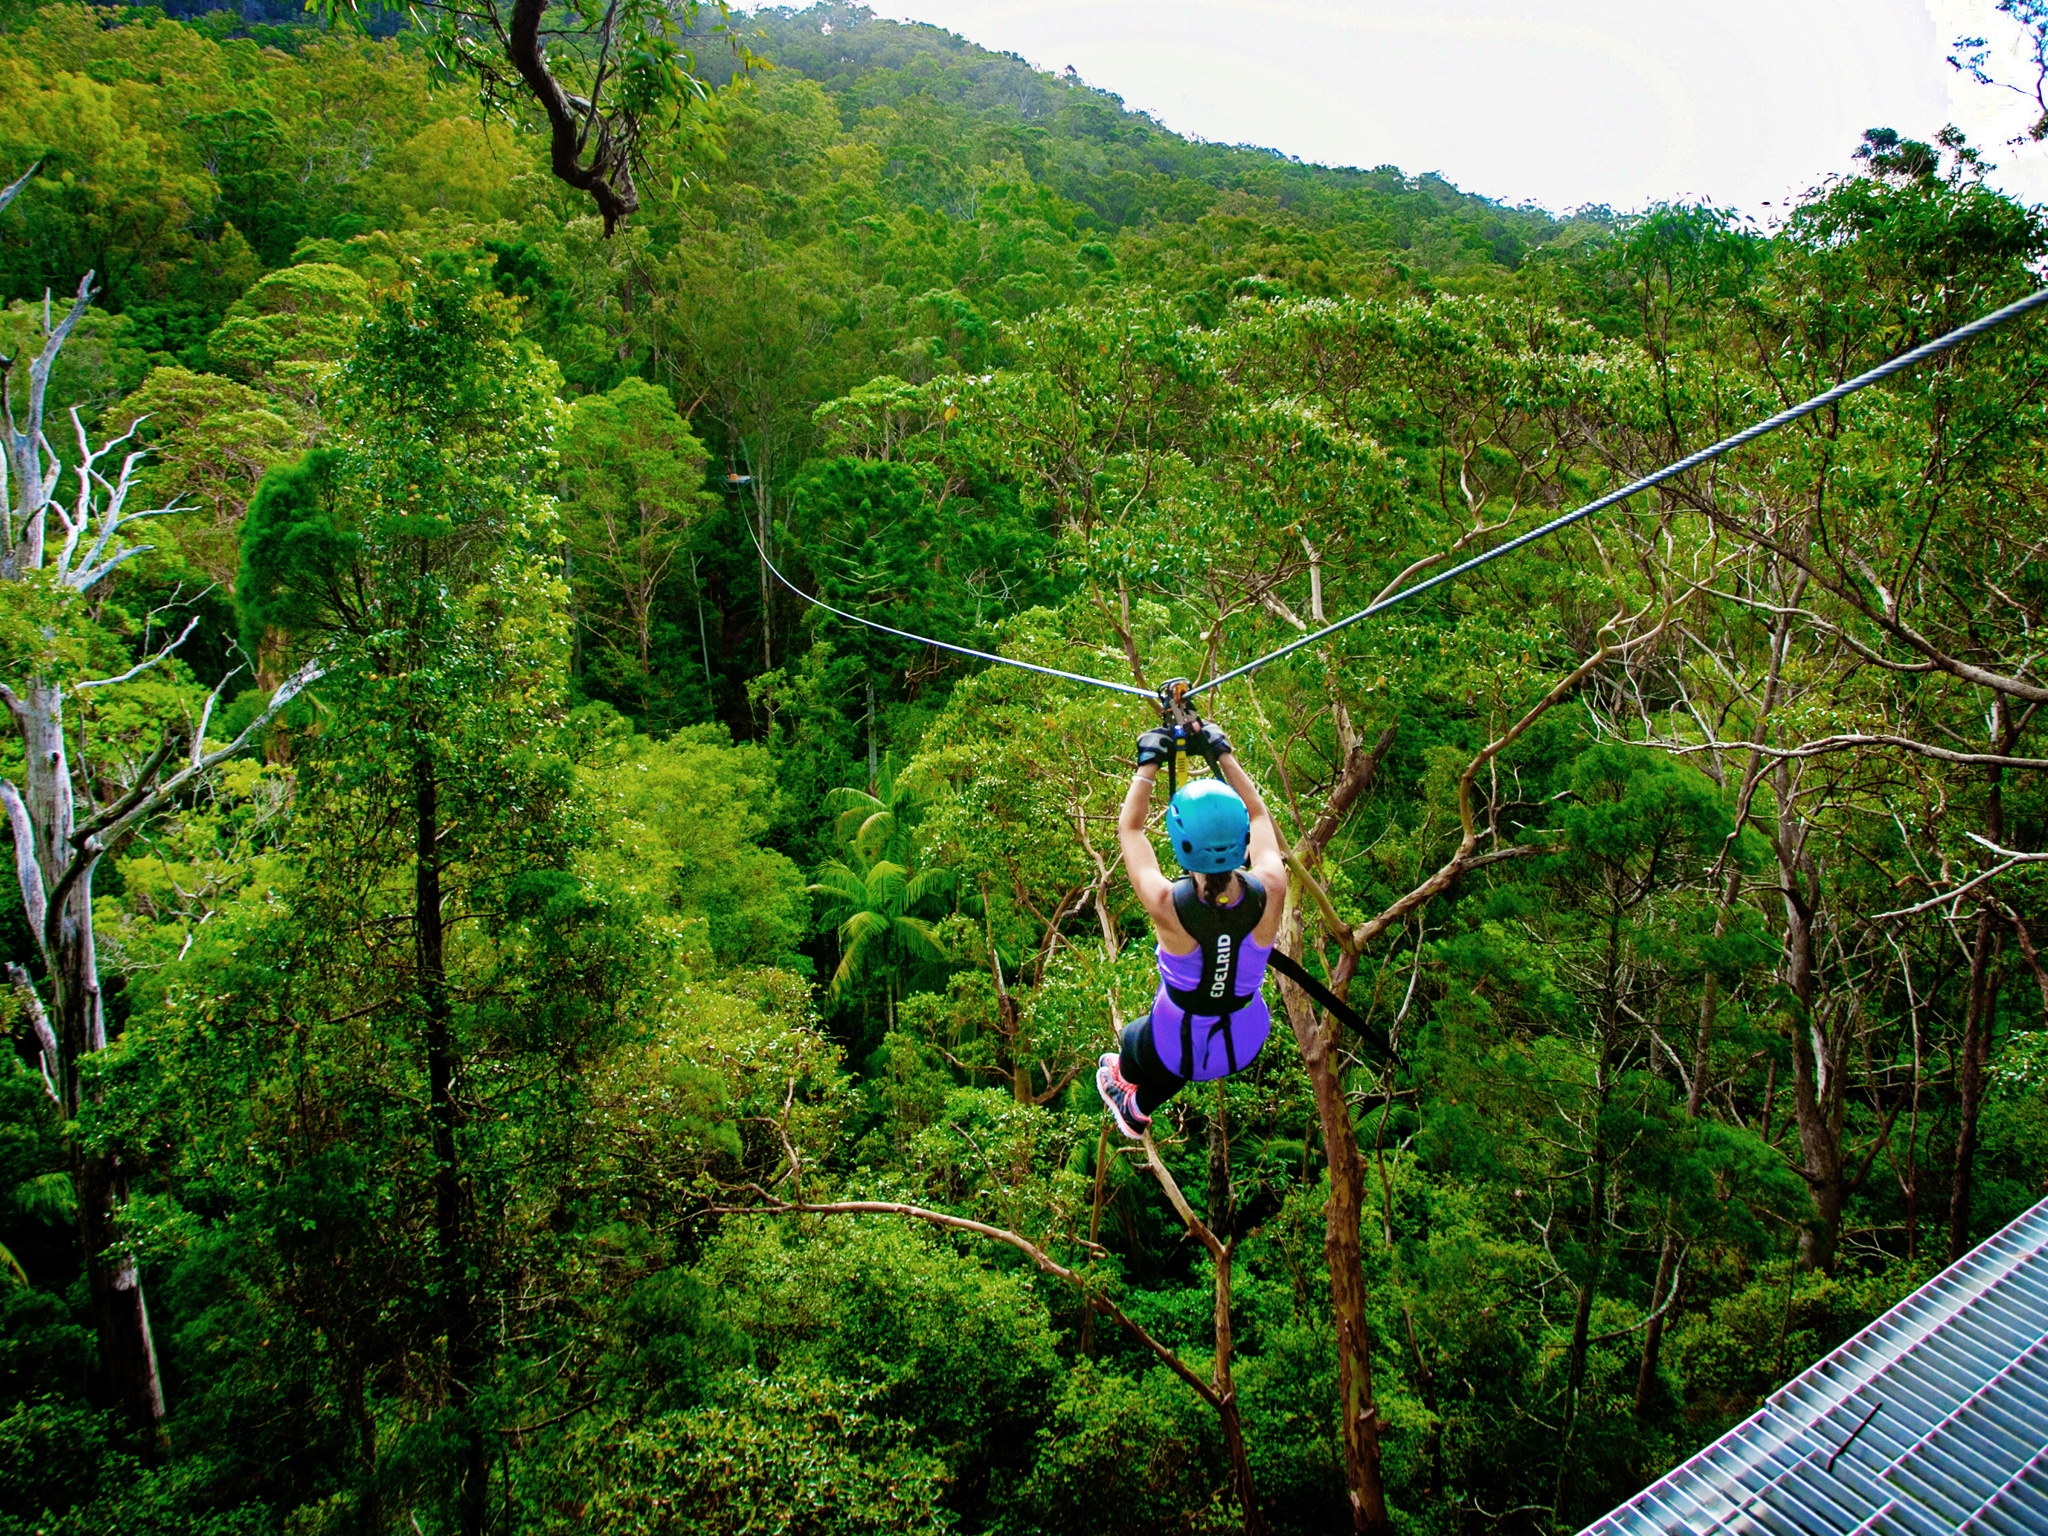 Canyon Flyer Guided Zipline Tour